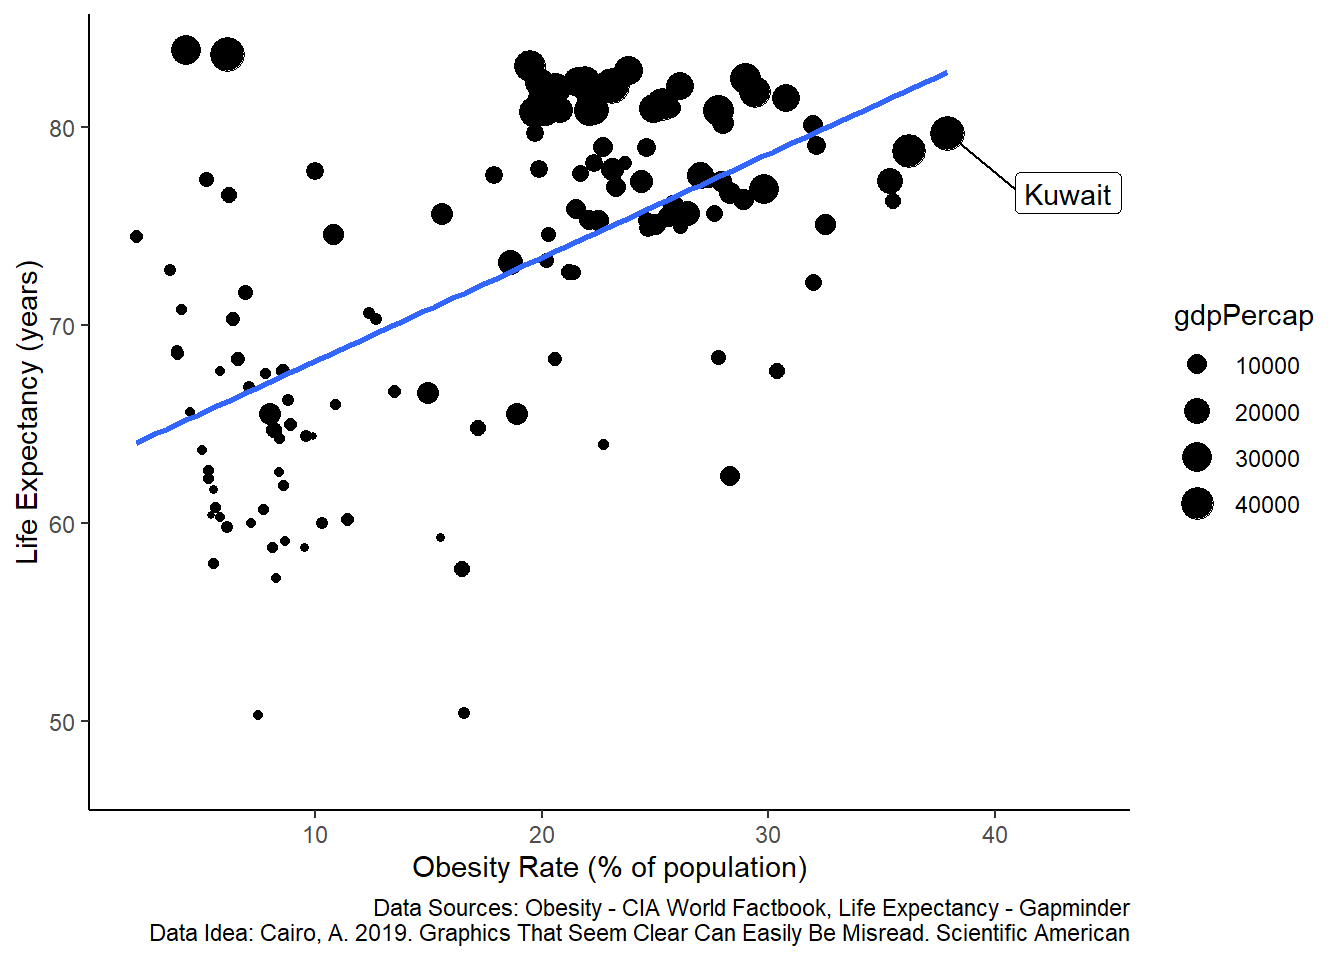 Correlation between life expectancy and the percent of a population that is extremely obese across countries. Each dot represents life expectancy and obesity for a single country in 2016 (n = 128 countries). The size of the dots scales with GDP per capita (in 2007 US Dollars). The regression line is a least-squares linear fit. Data are compiled by www.gapminder.org.